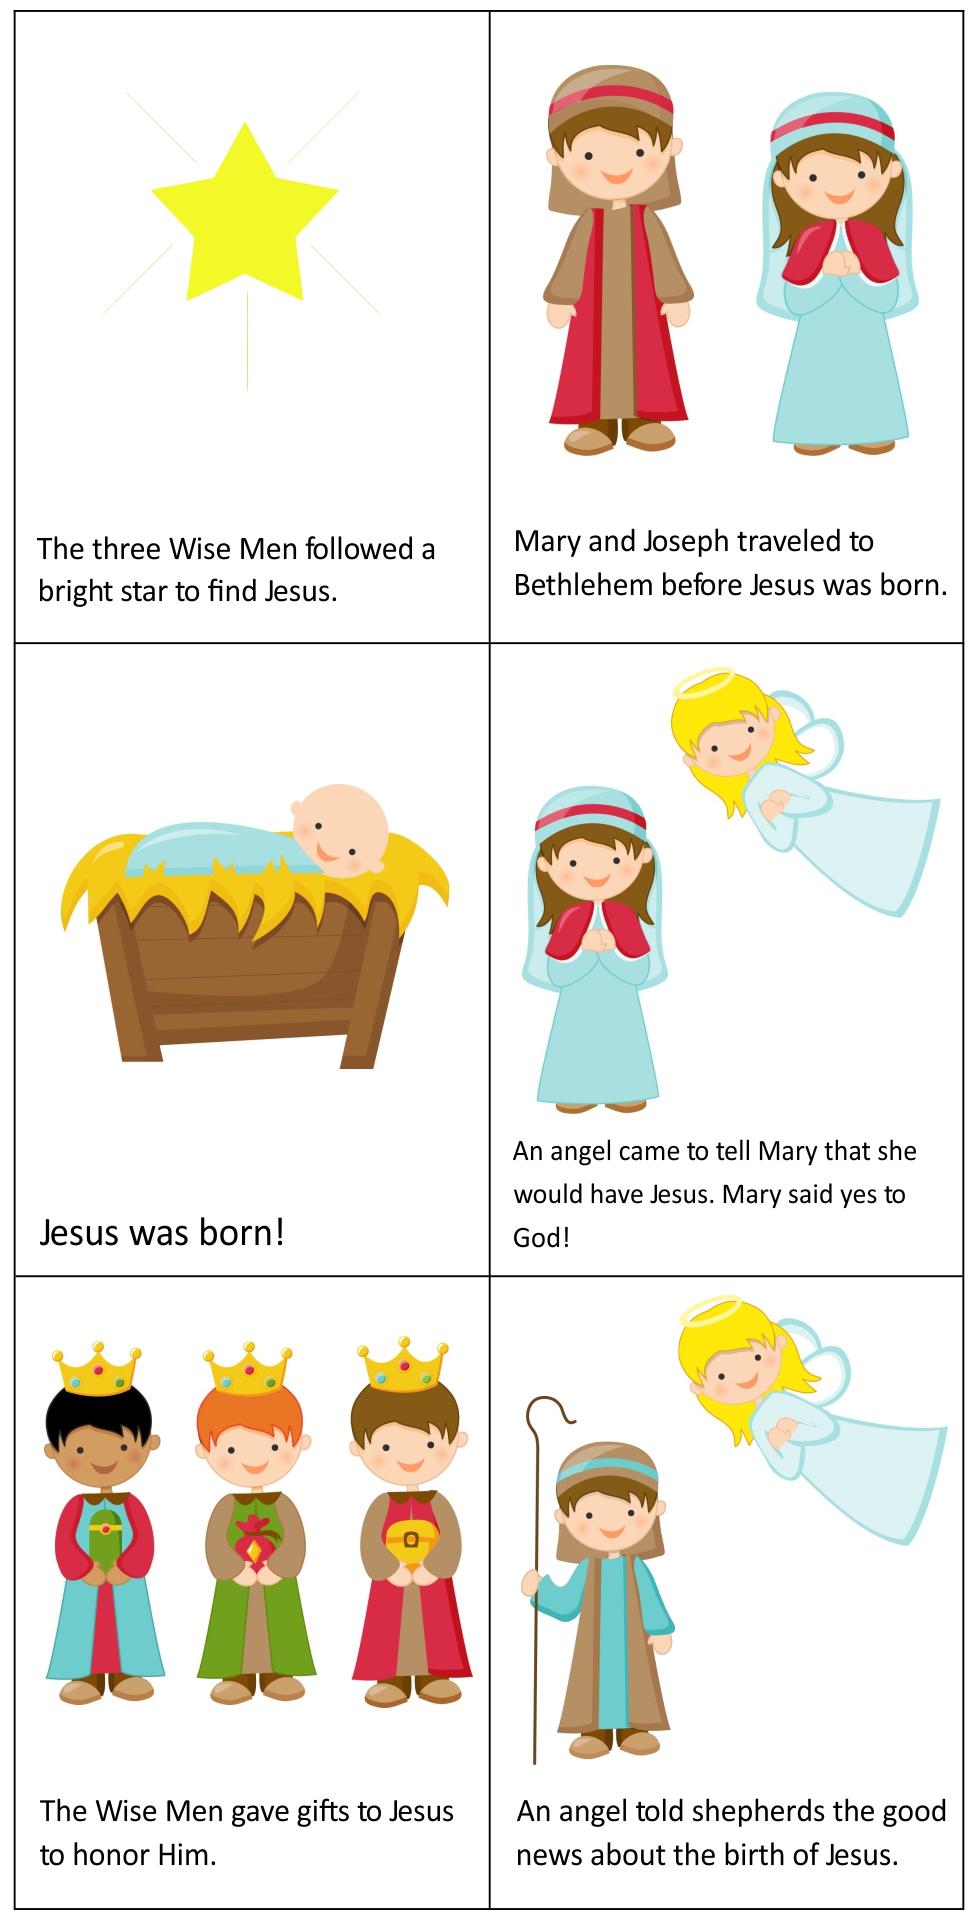 7 Best Images of Nativity Story Printable Book - Printable Nativity